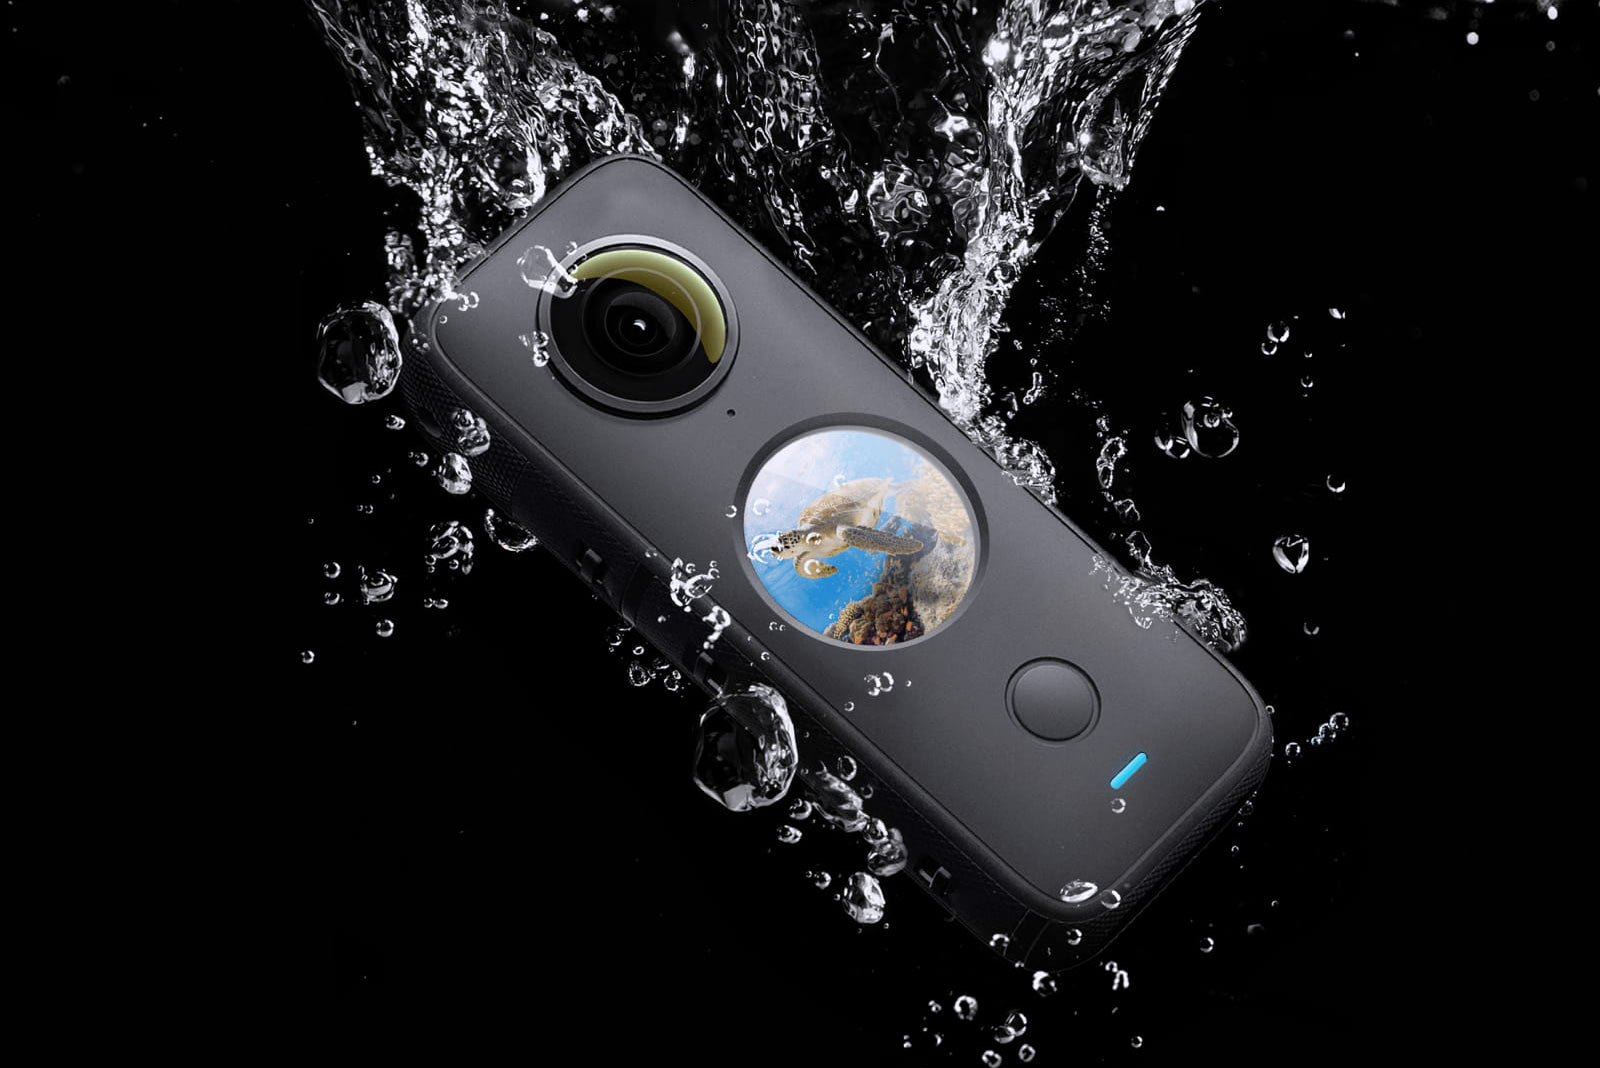 insta360 one x2 360-degree action camera with app-based editing